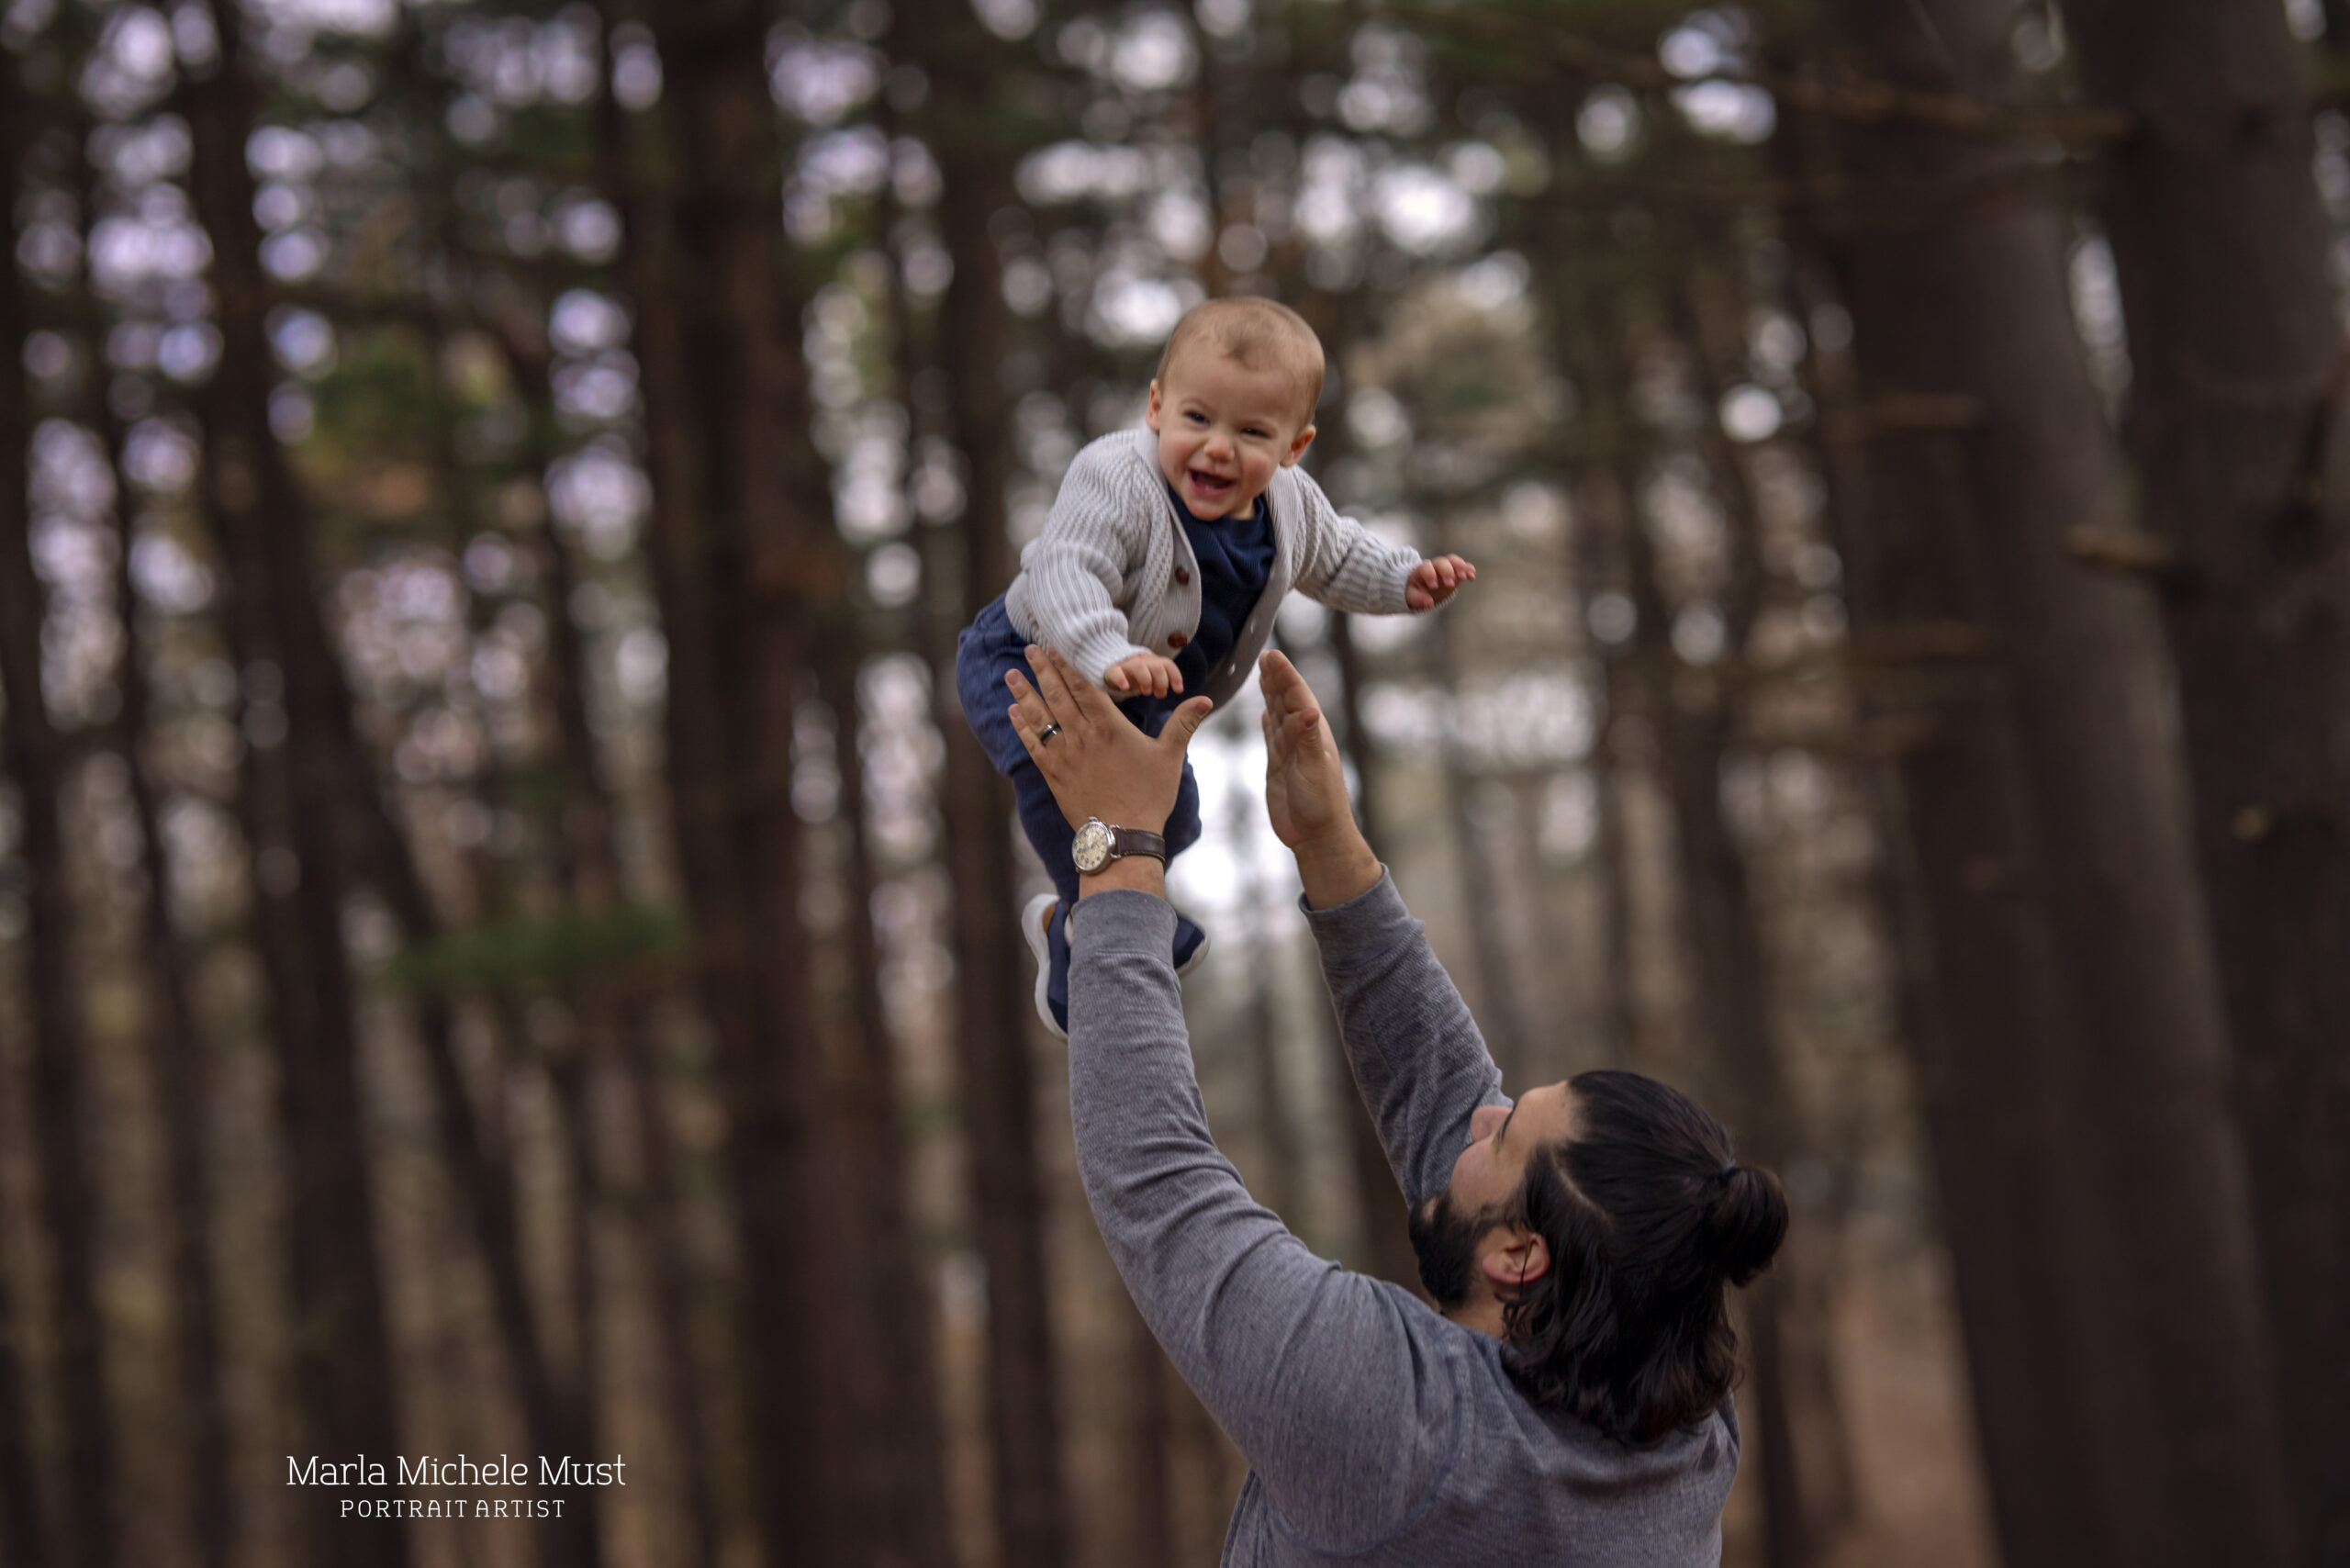 A fall portrait of a man holding up his baby while the baby laughs.